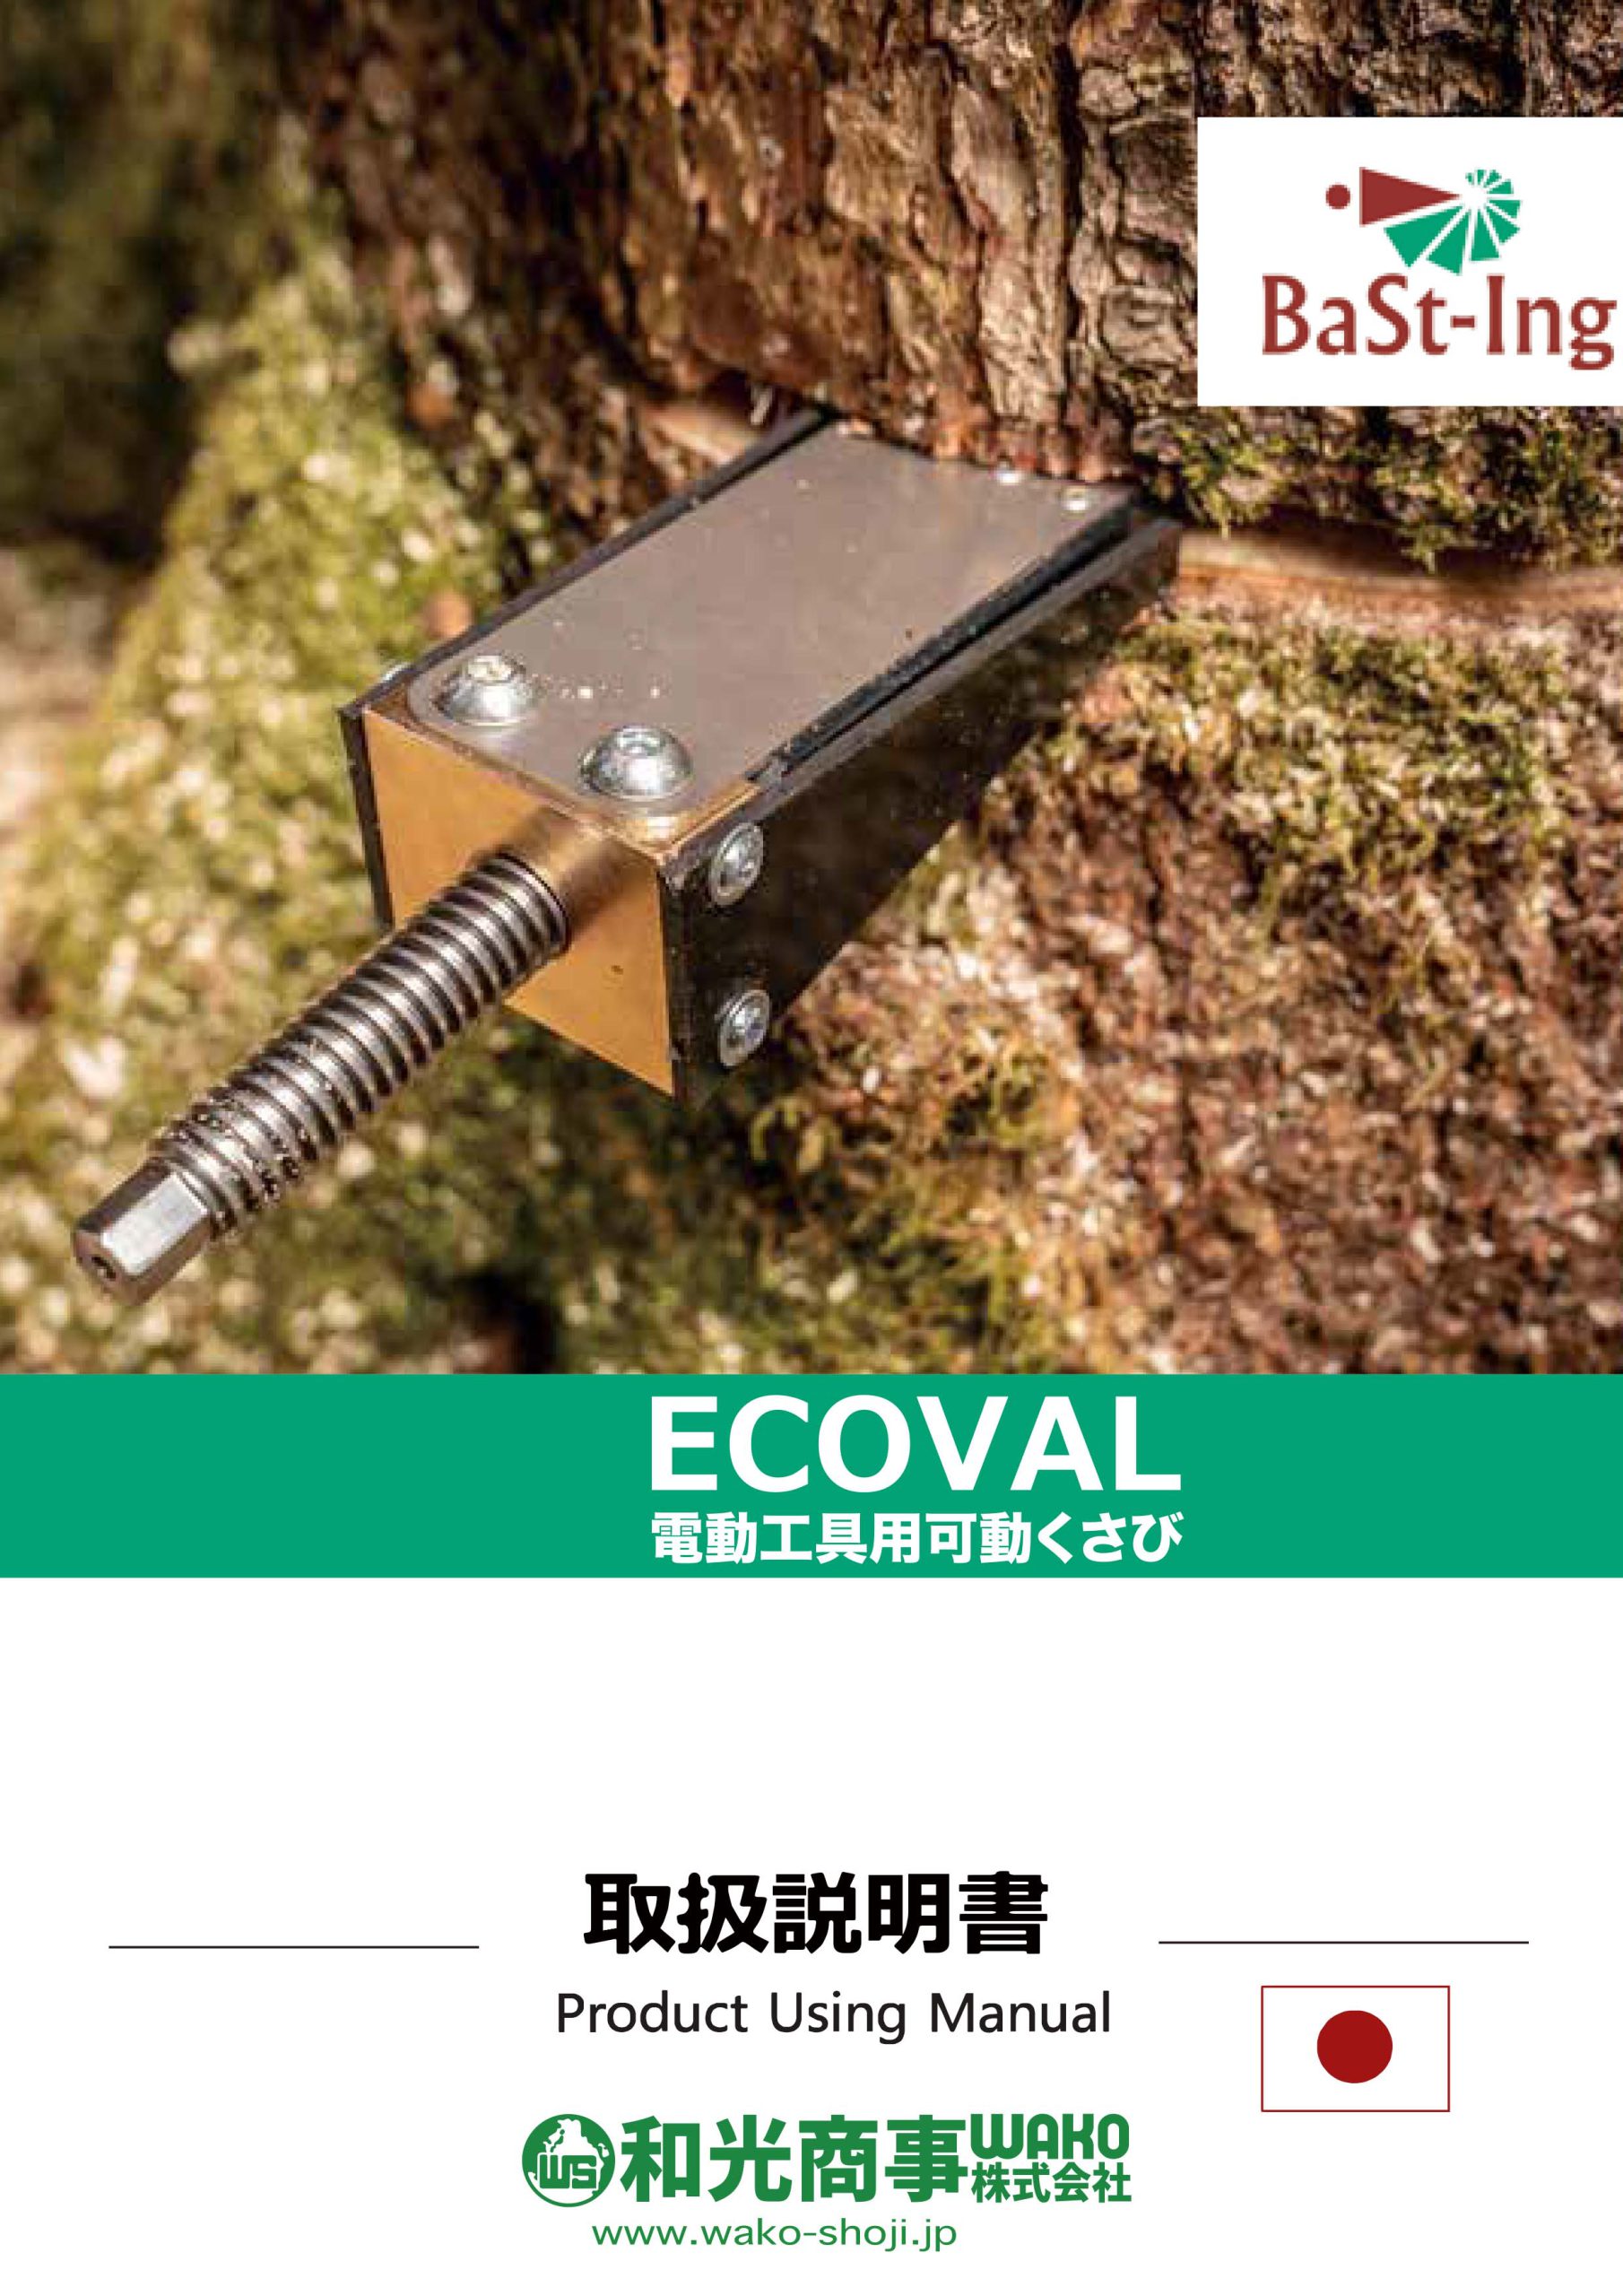 ECOVAL